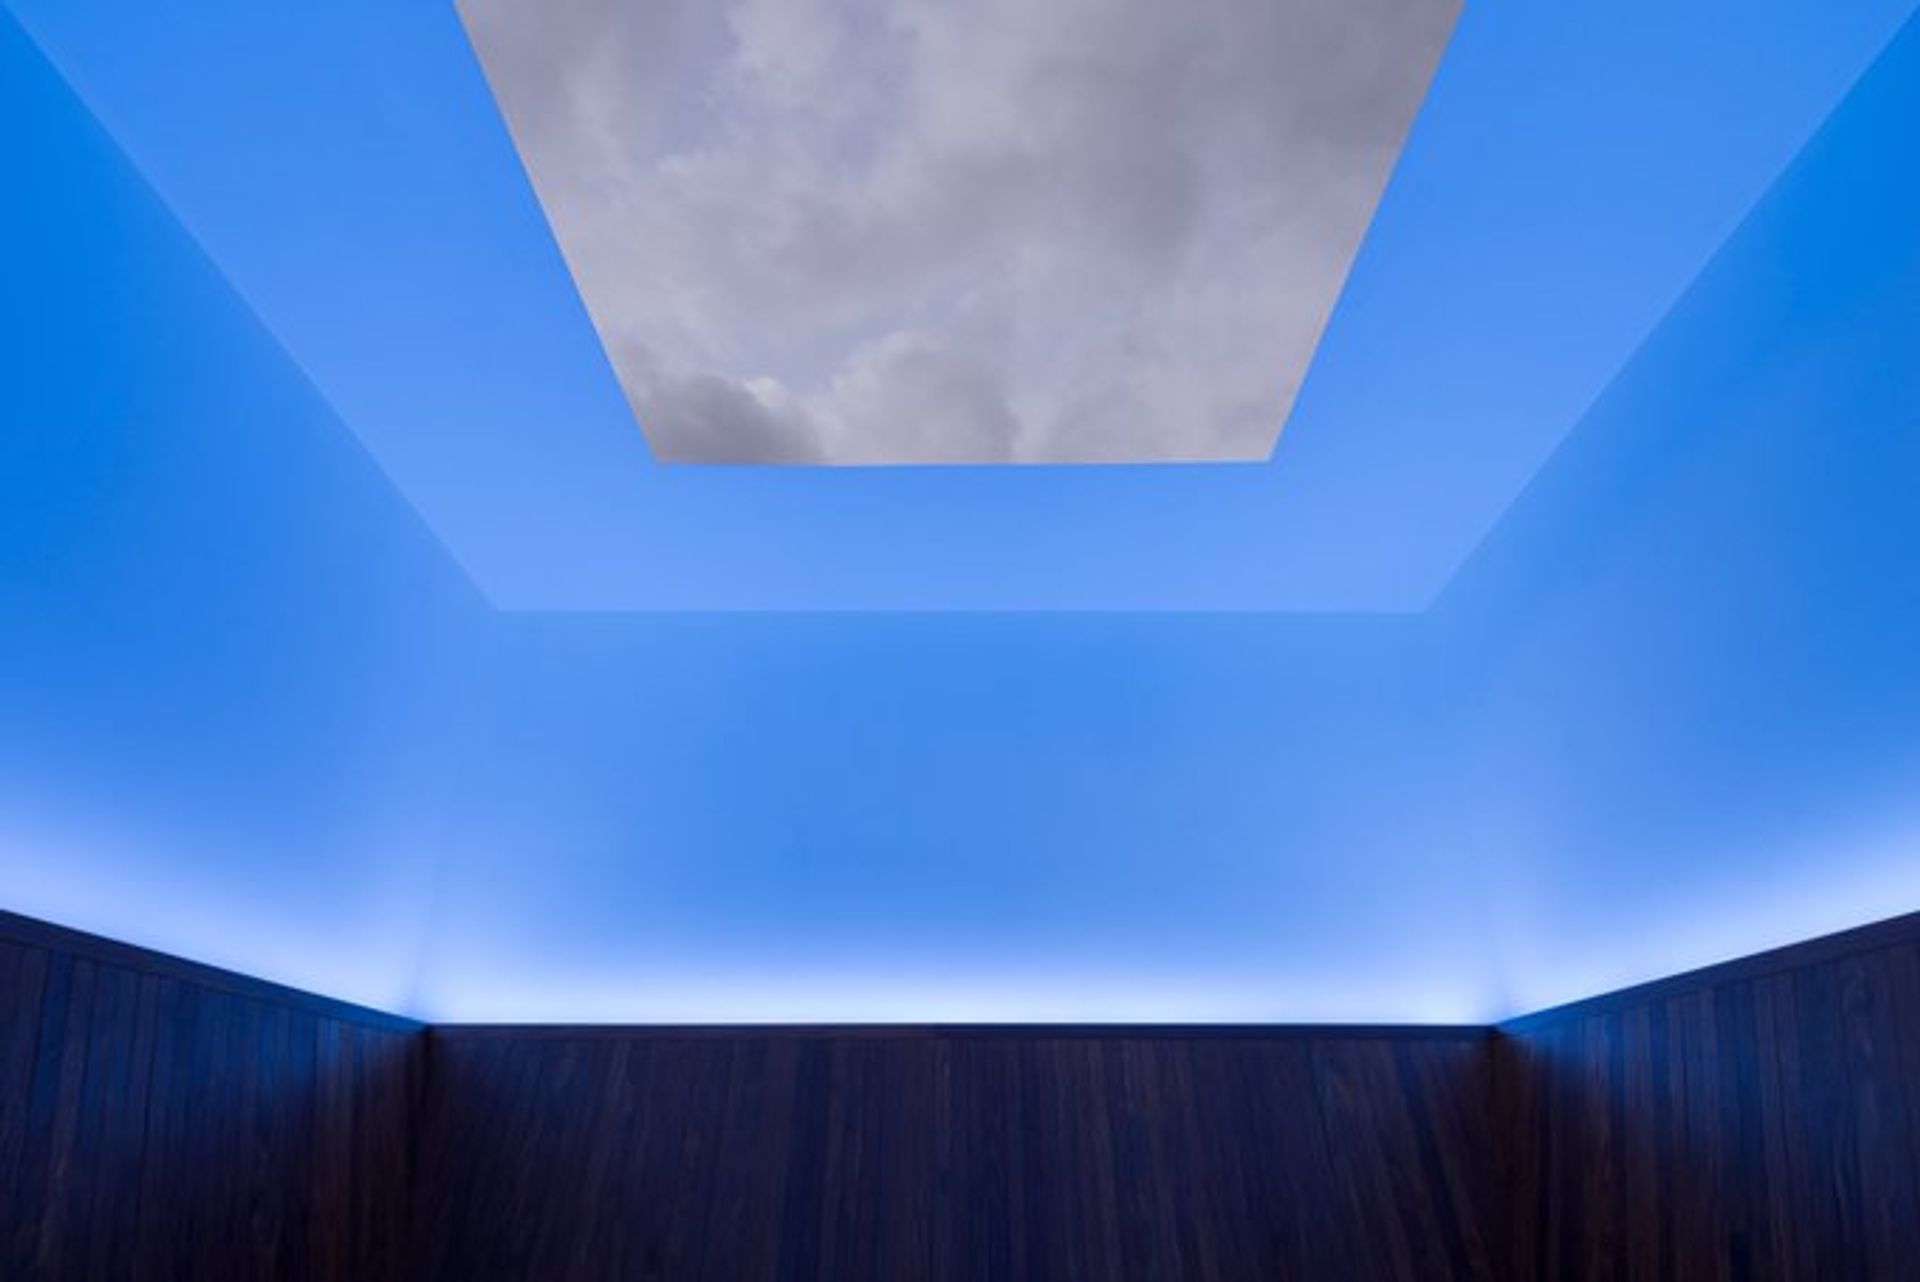 James Turrell, Meeting (1980-86/2016) Courtesy MoMA PS1